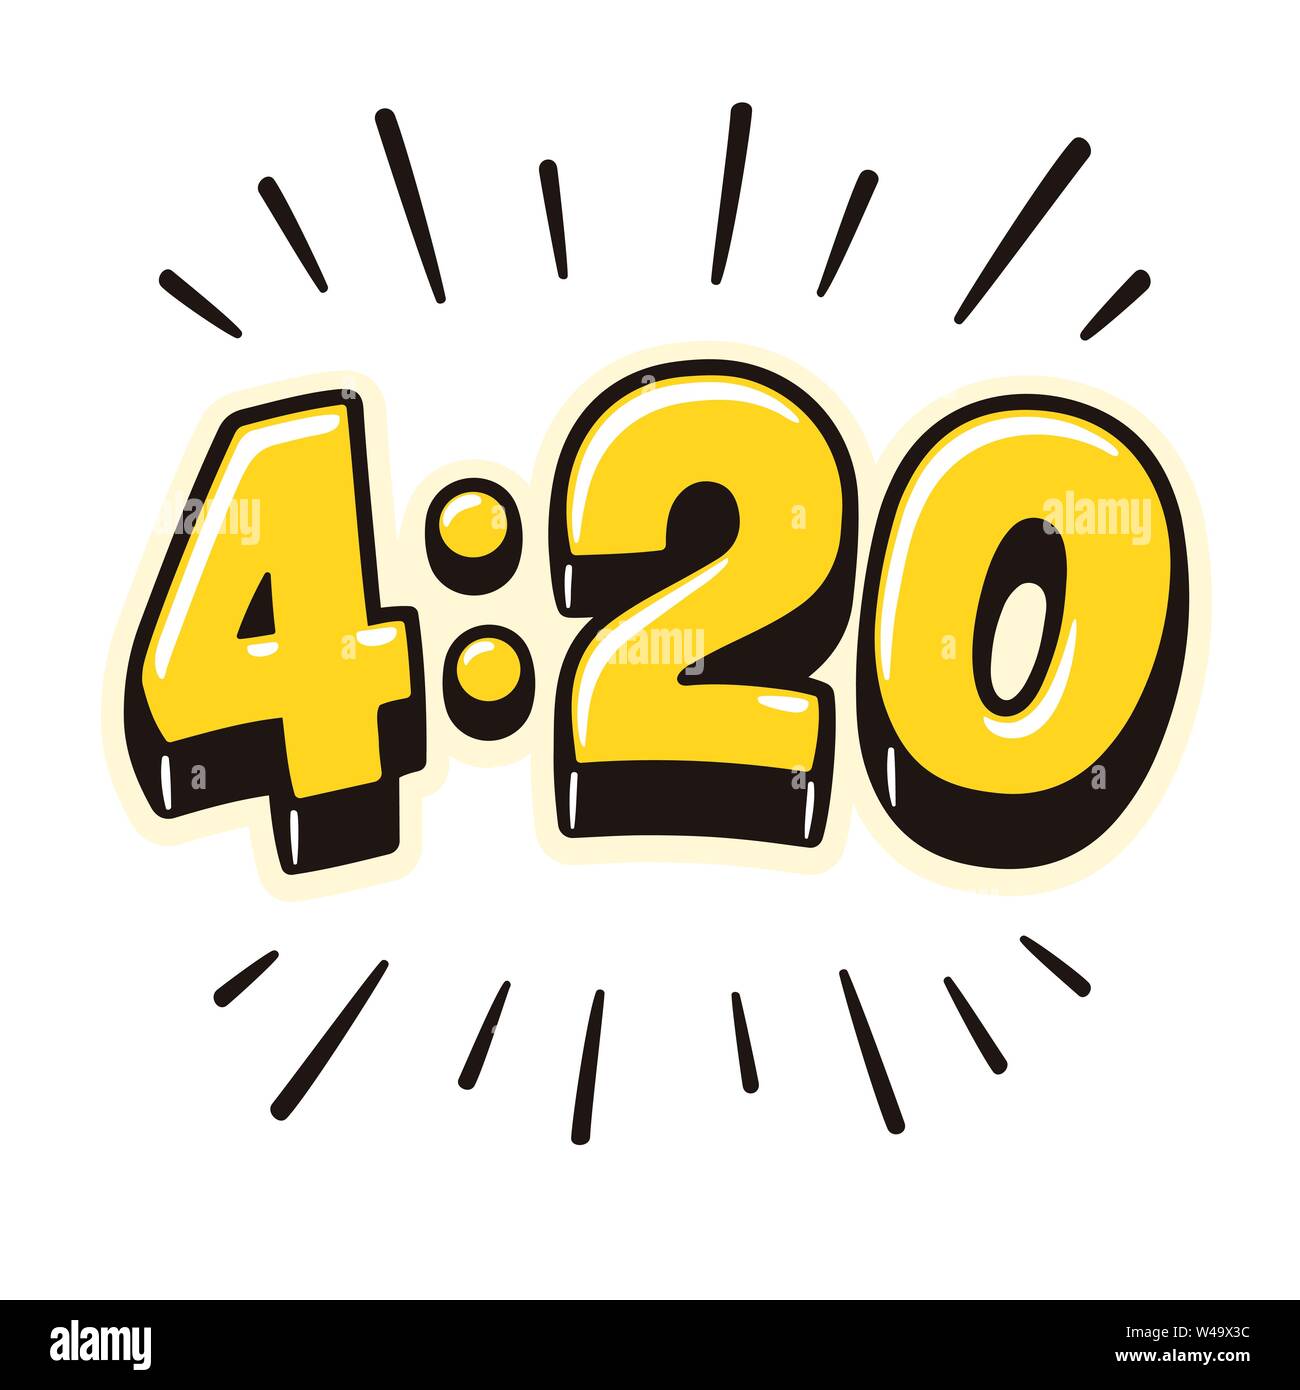 4:20 / Law Enforcement Targets Drugged Driving For 4 20 Weekend